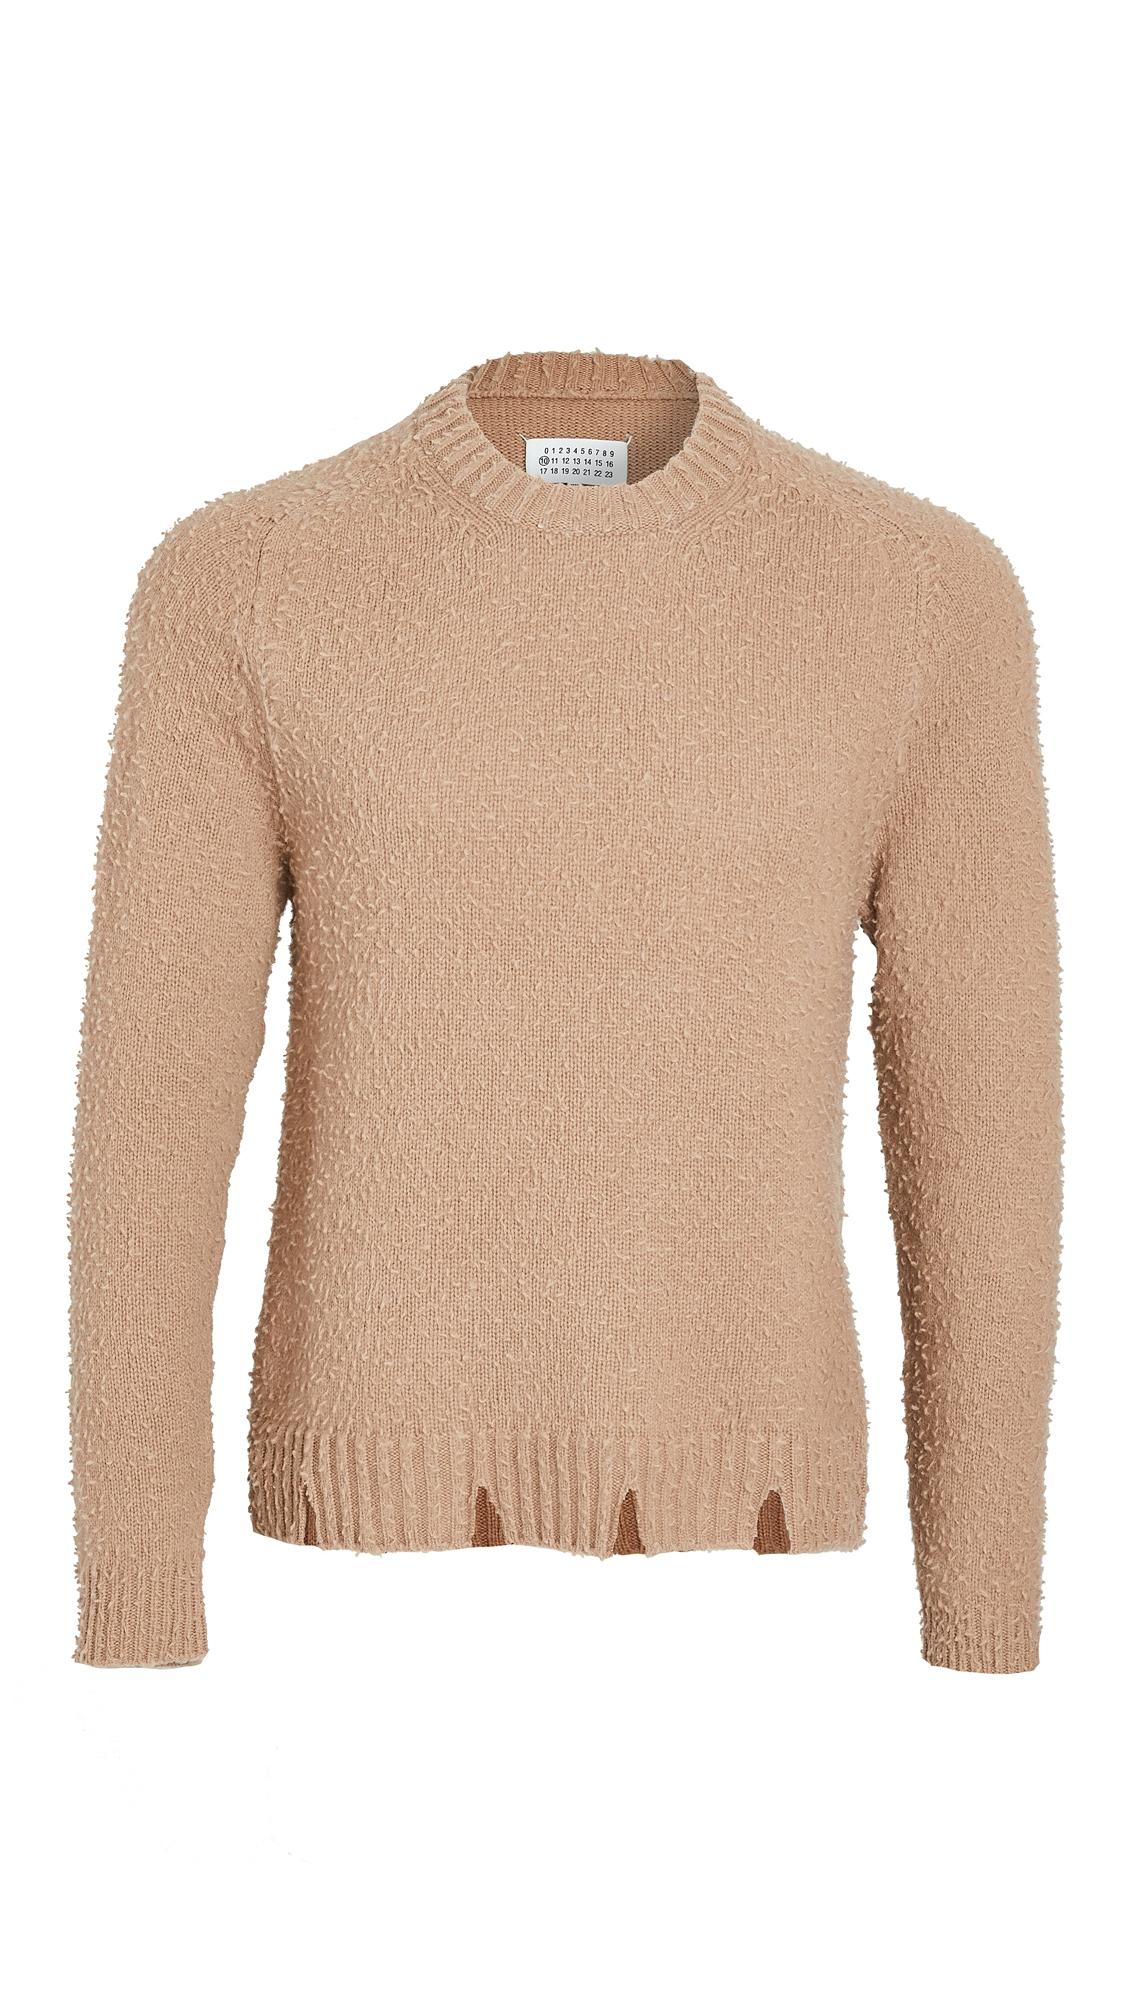 Maison Margiela Wool Distressed Casentino Crew Neck Sweater in Camel ...